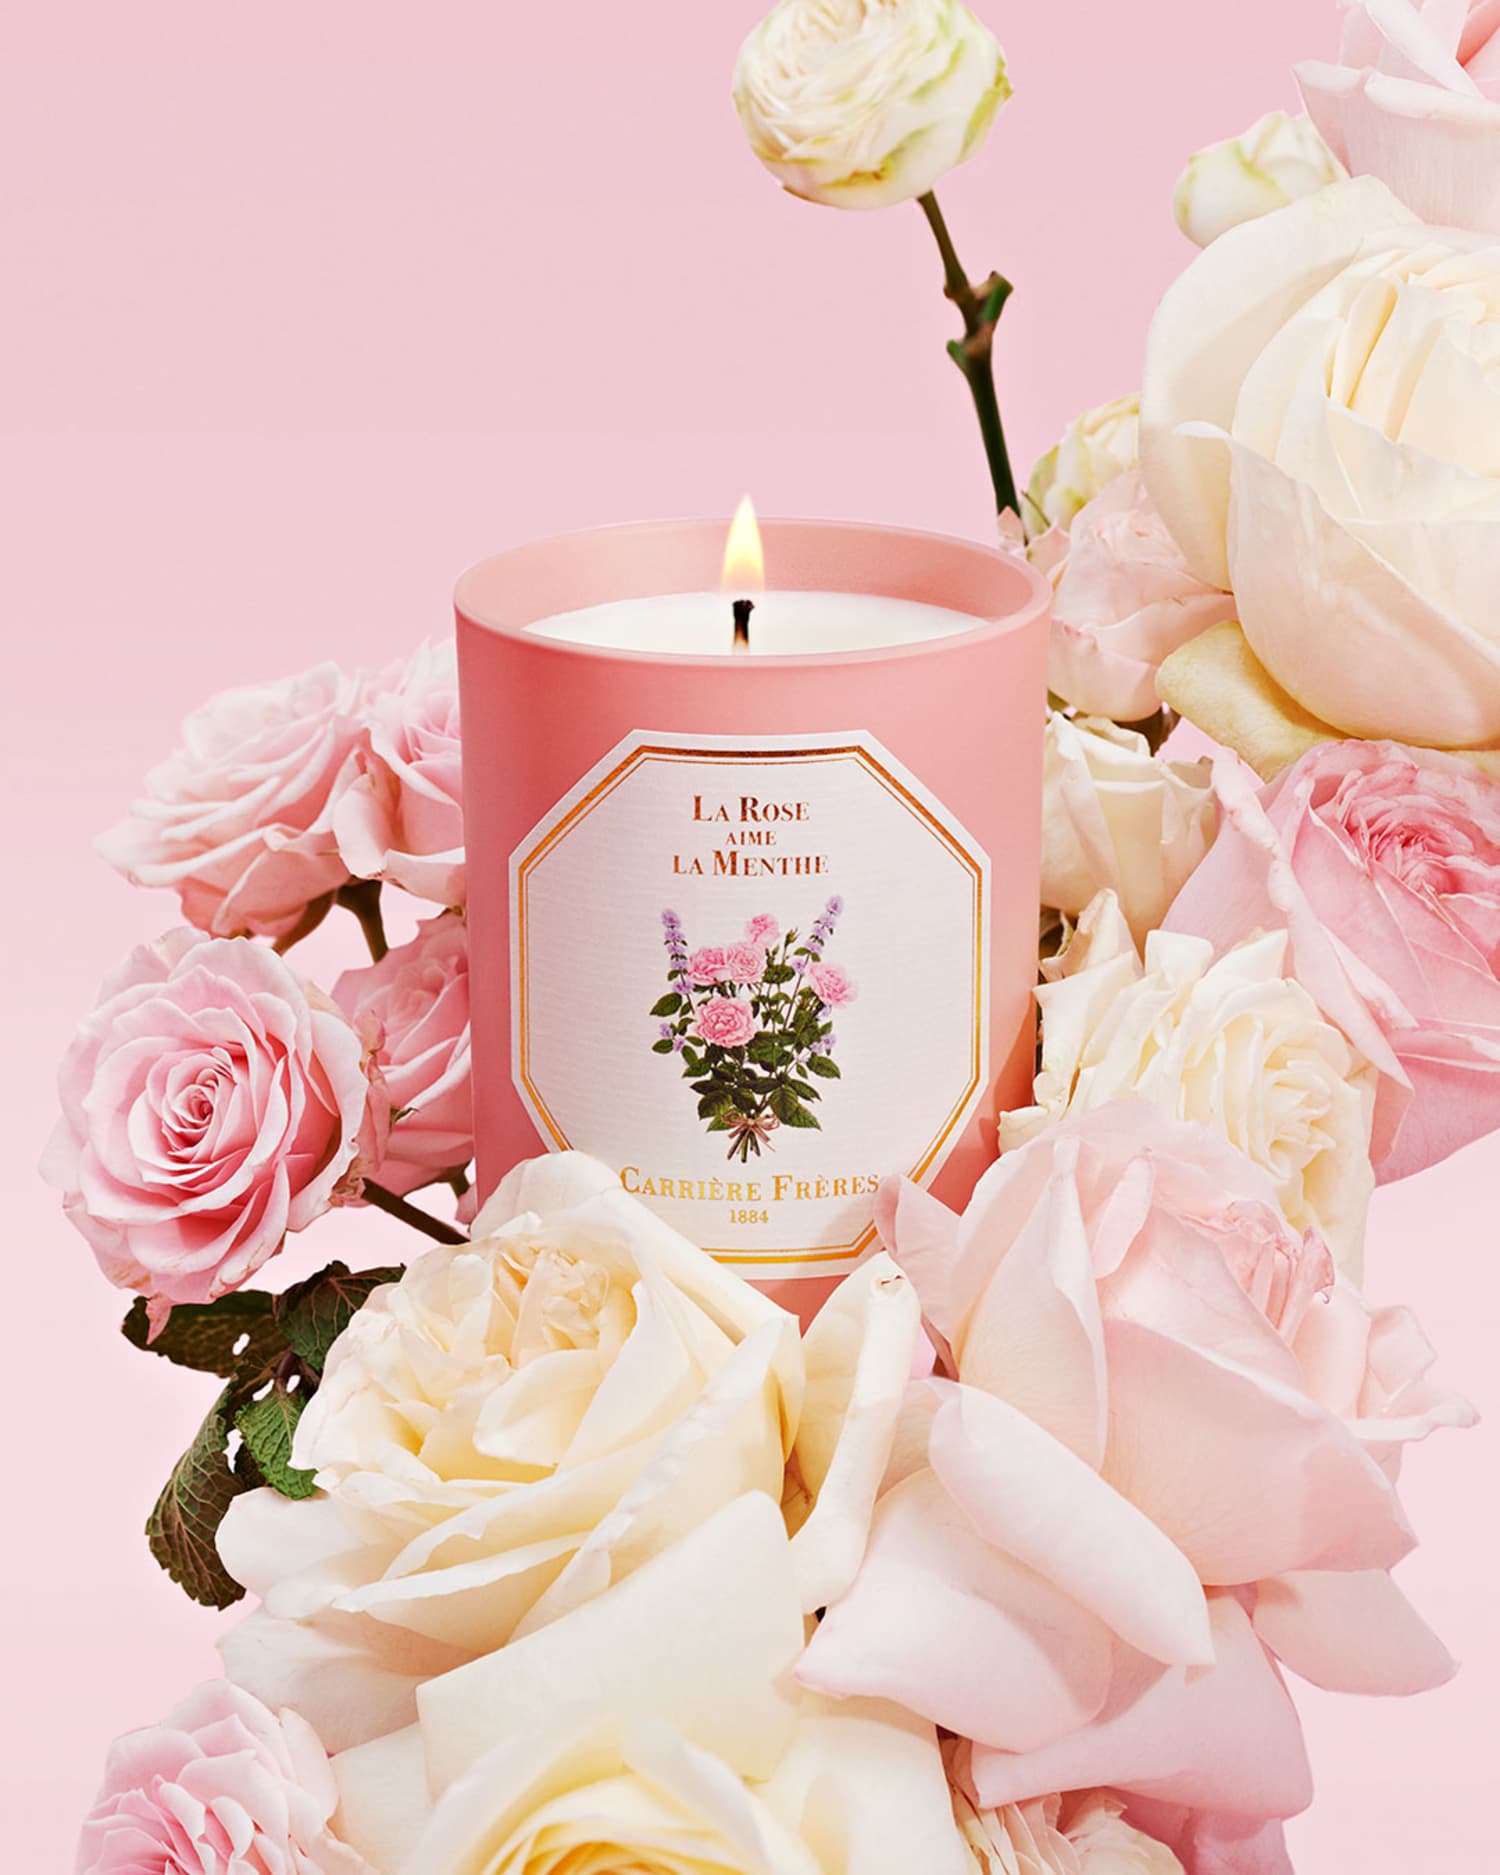 Prepare to Fall in Love With These New Valentine’s Day Candles